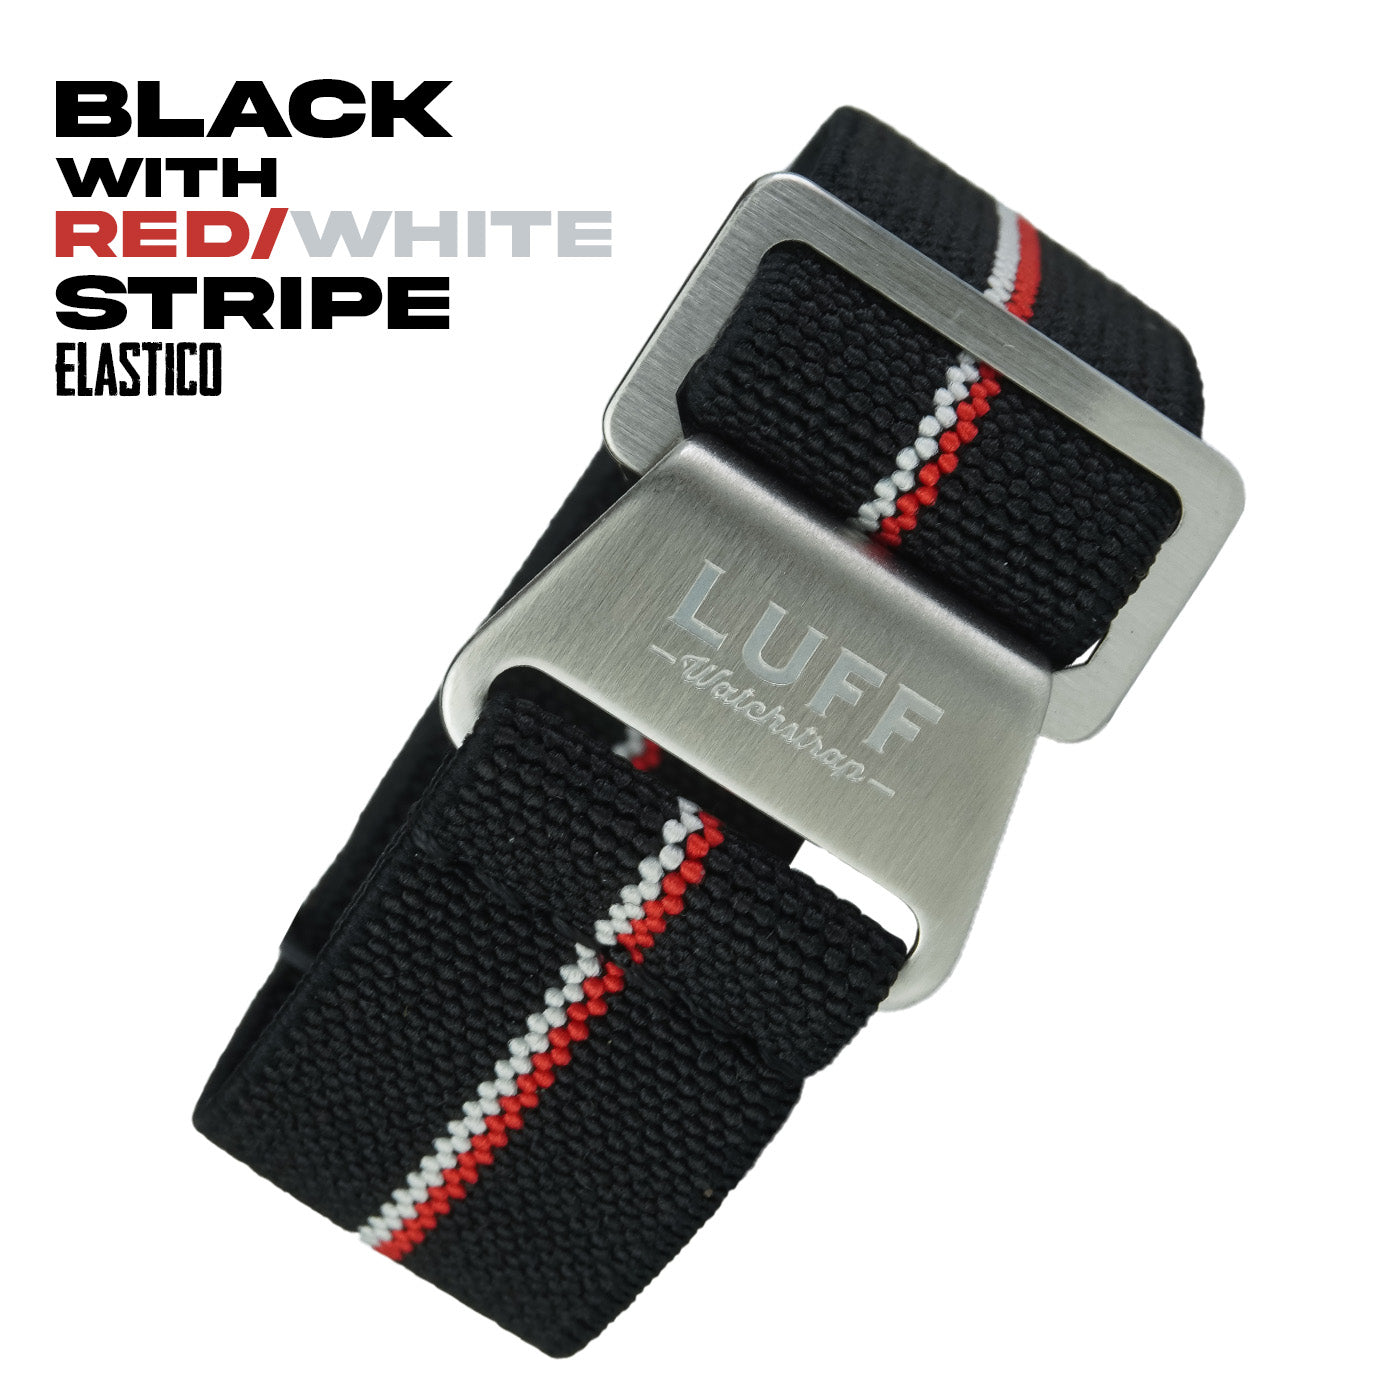 Black with Red/White Stripe (6904191844439)